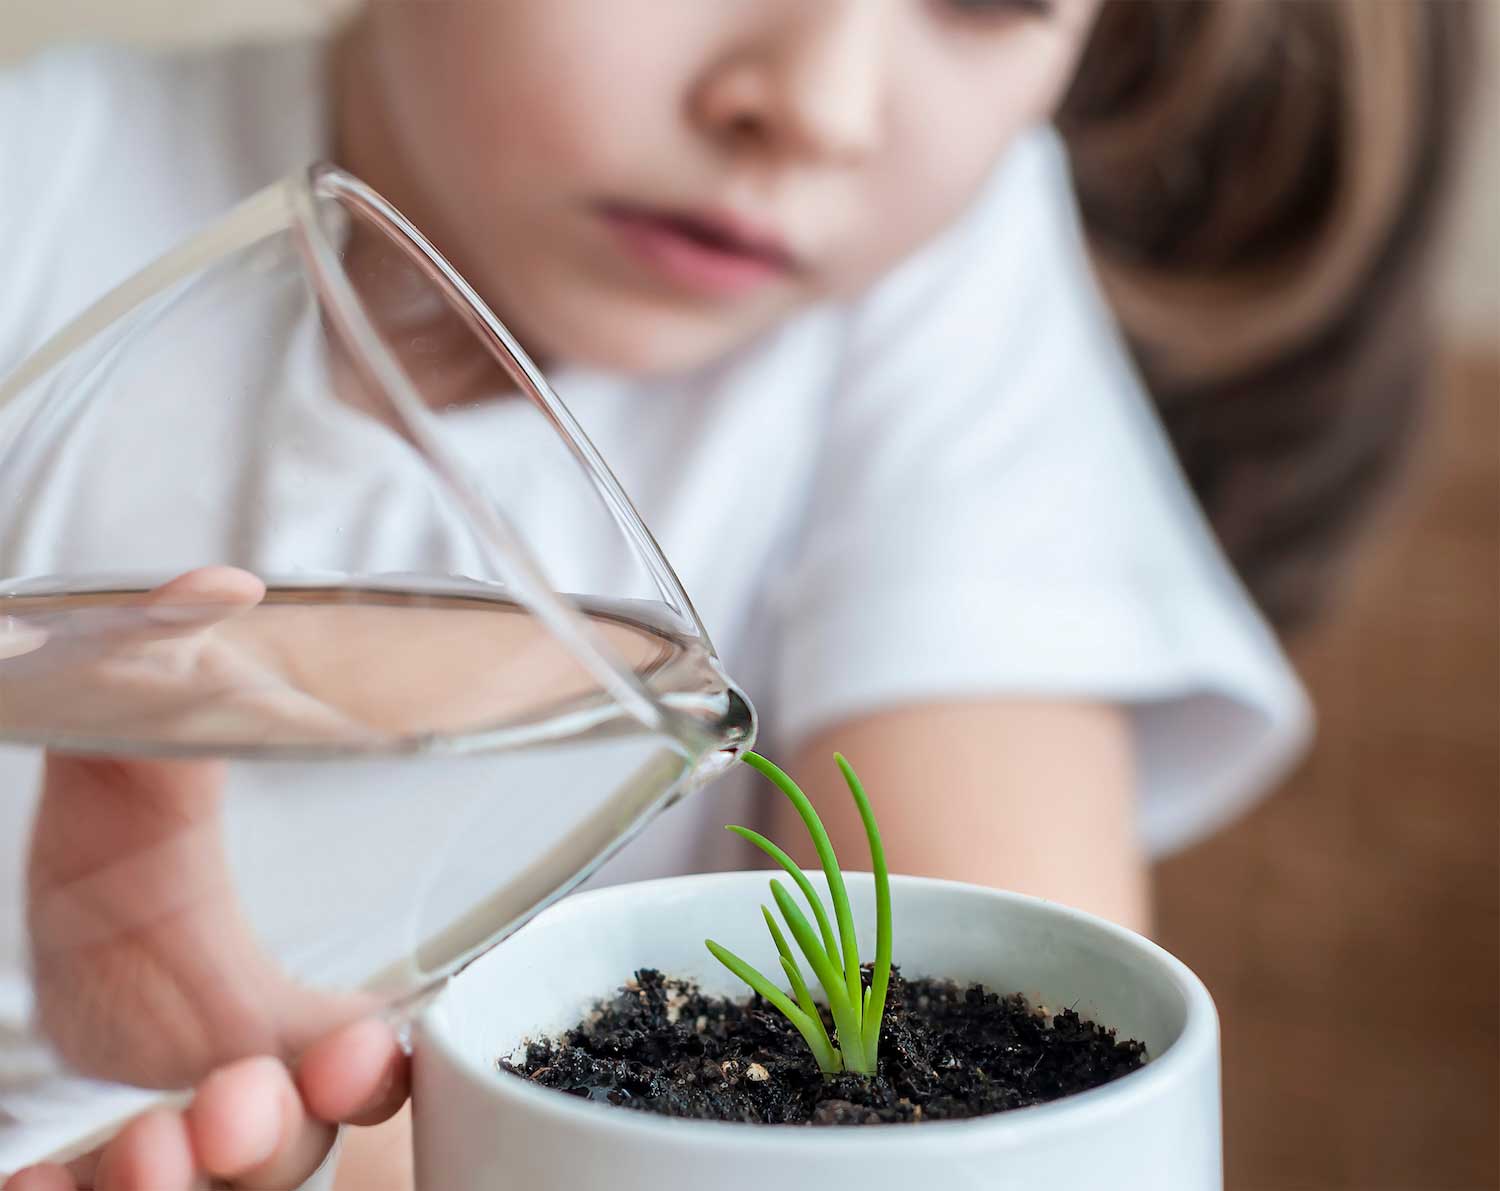 A young child pouring water on a planting sprouting up in a container.